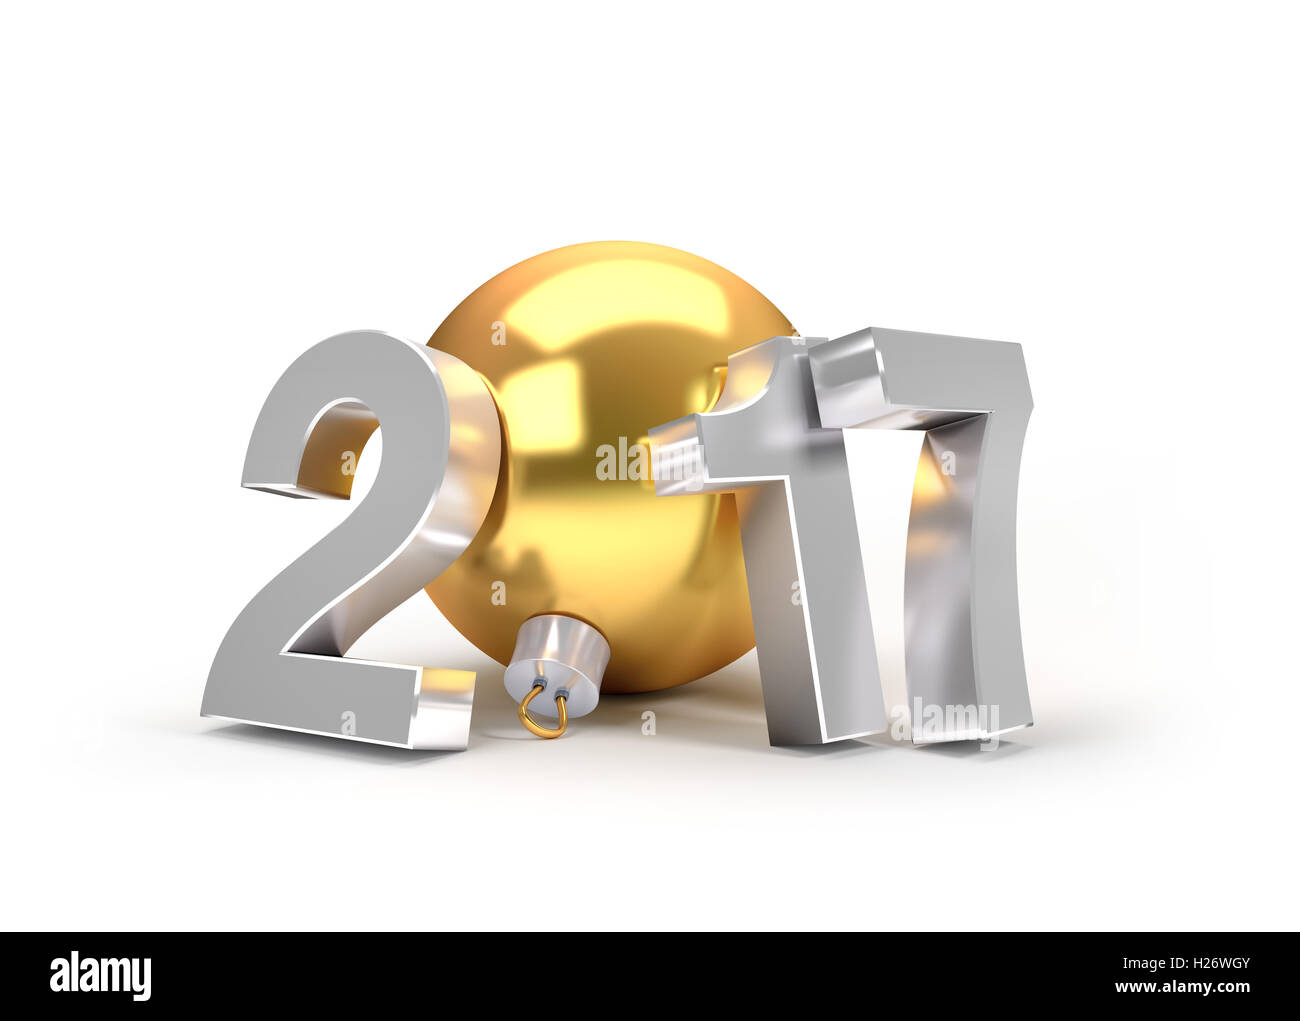 New Year 2017 type with a gold christmas ball - 3D illustration Stock Photo